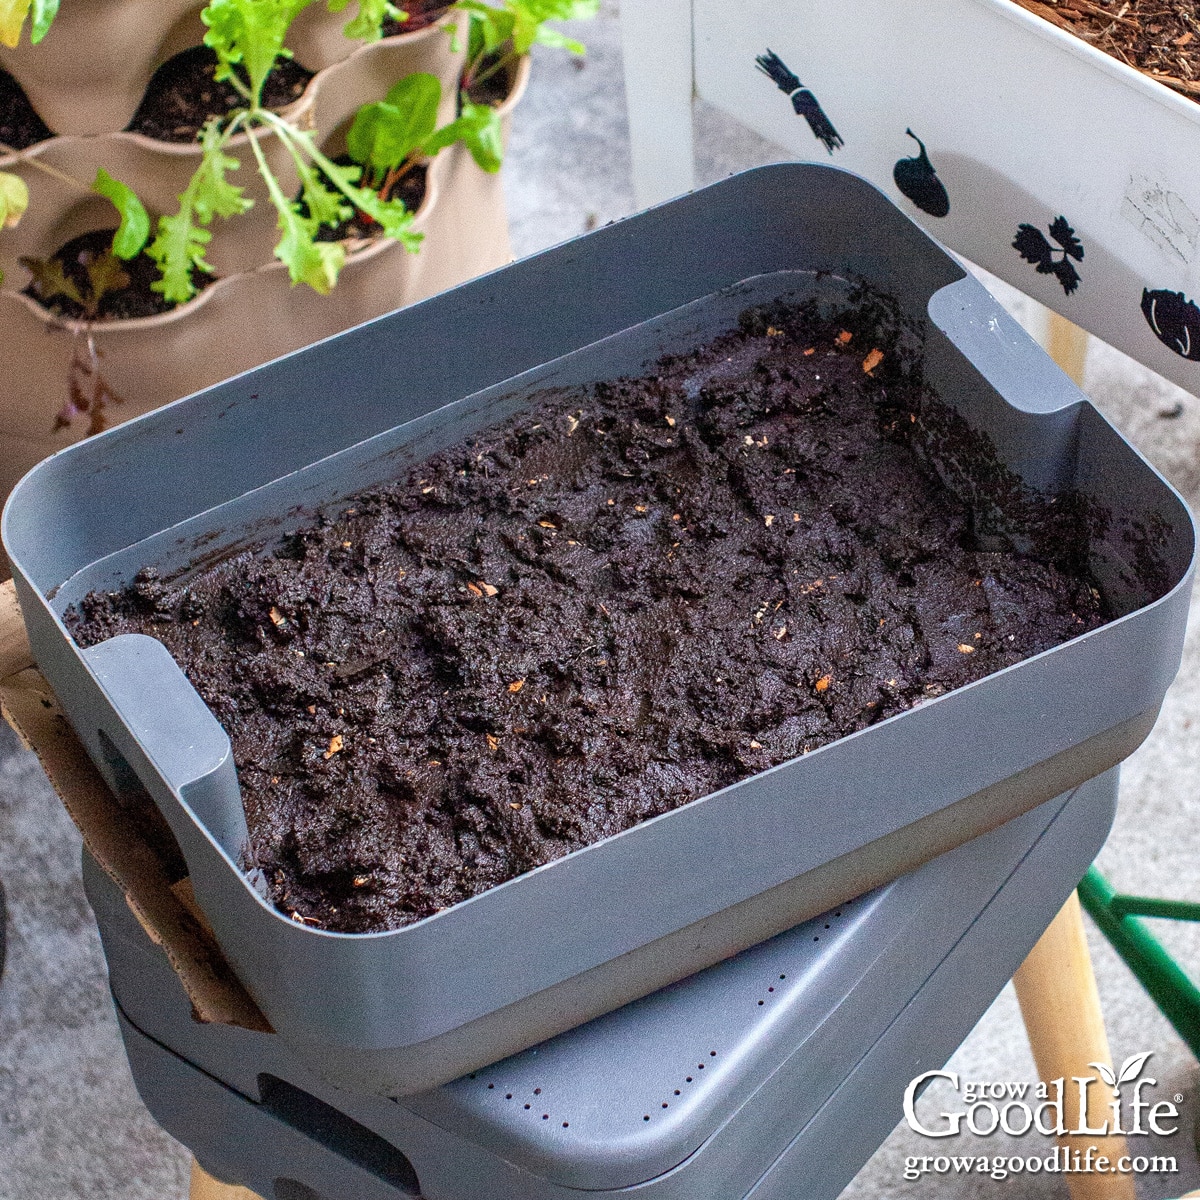 How to Start a Worm Composting Bin